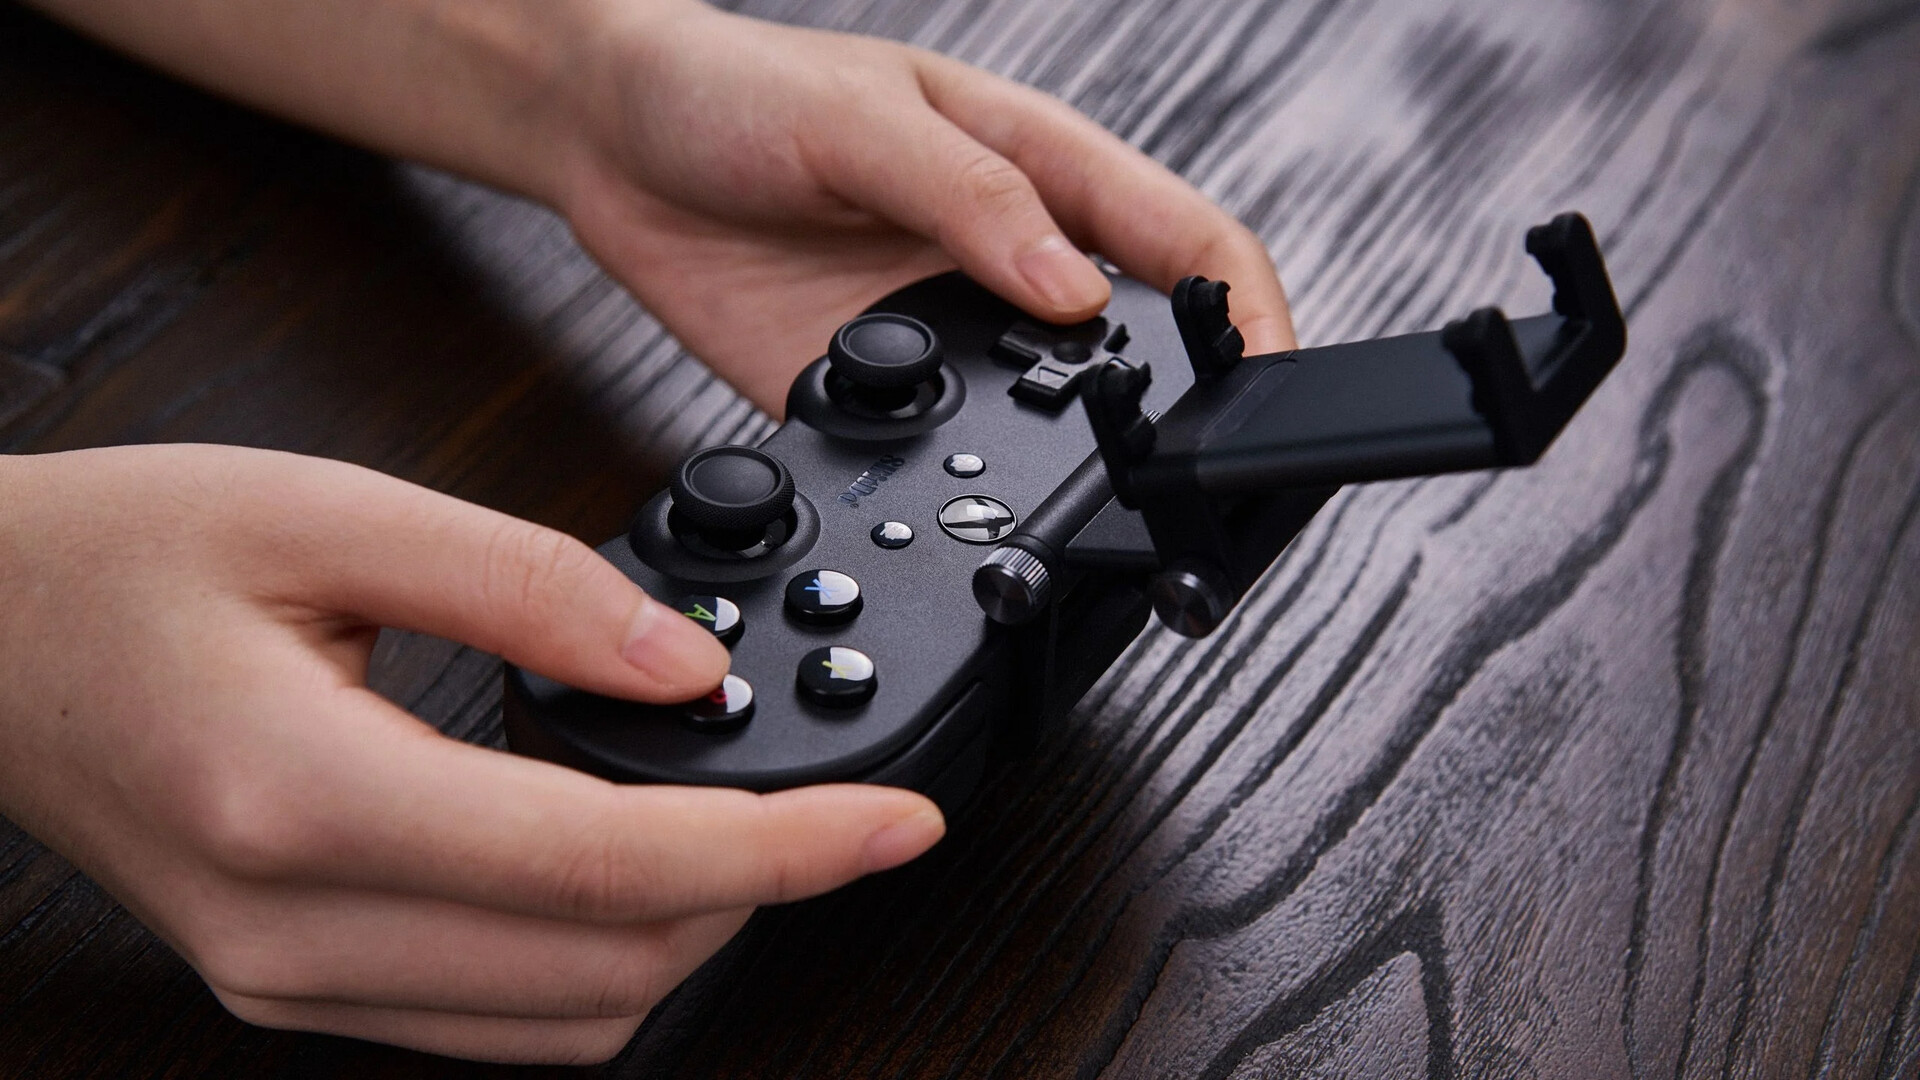 8bitdo mobile gaming clip for xbox controllers